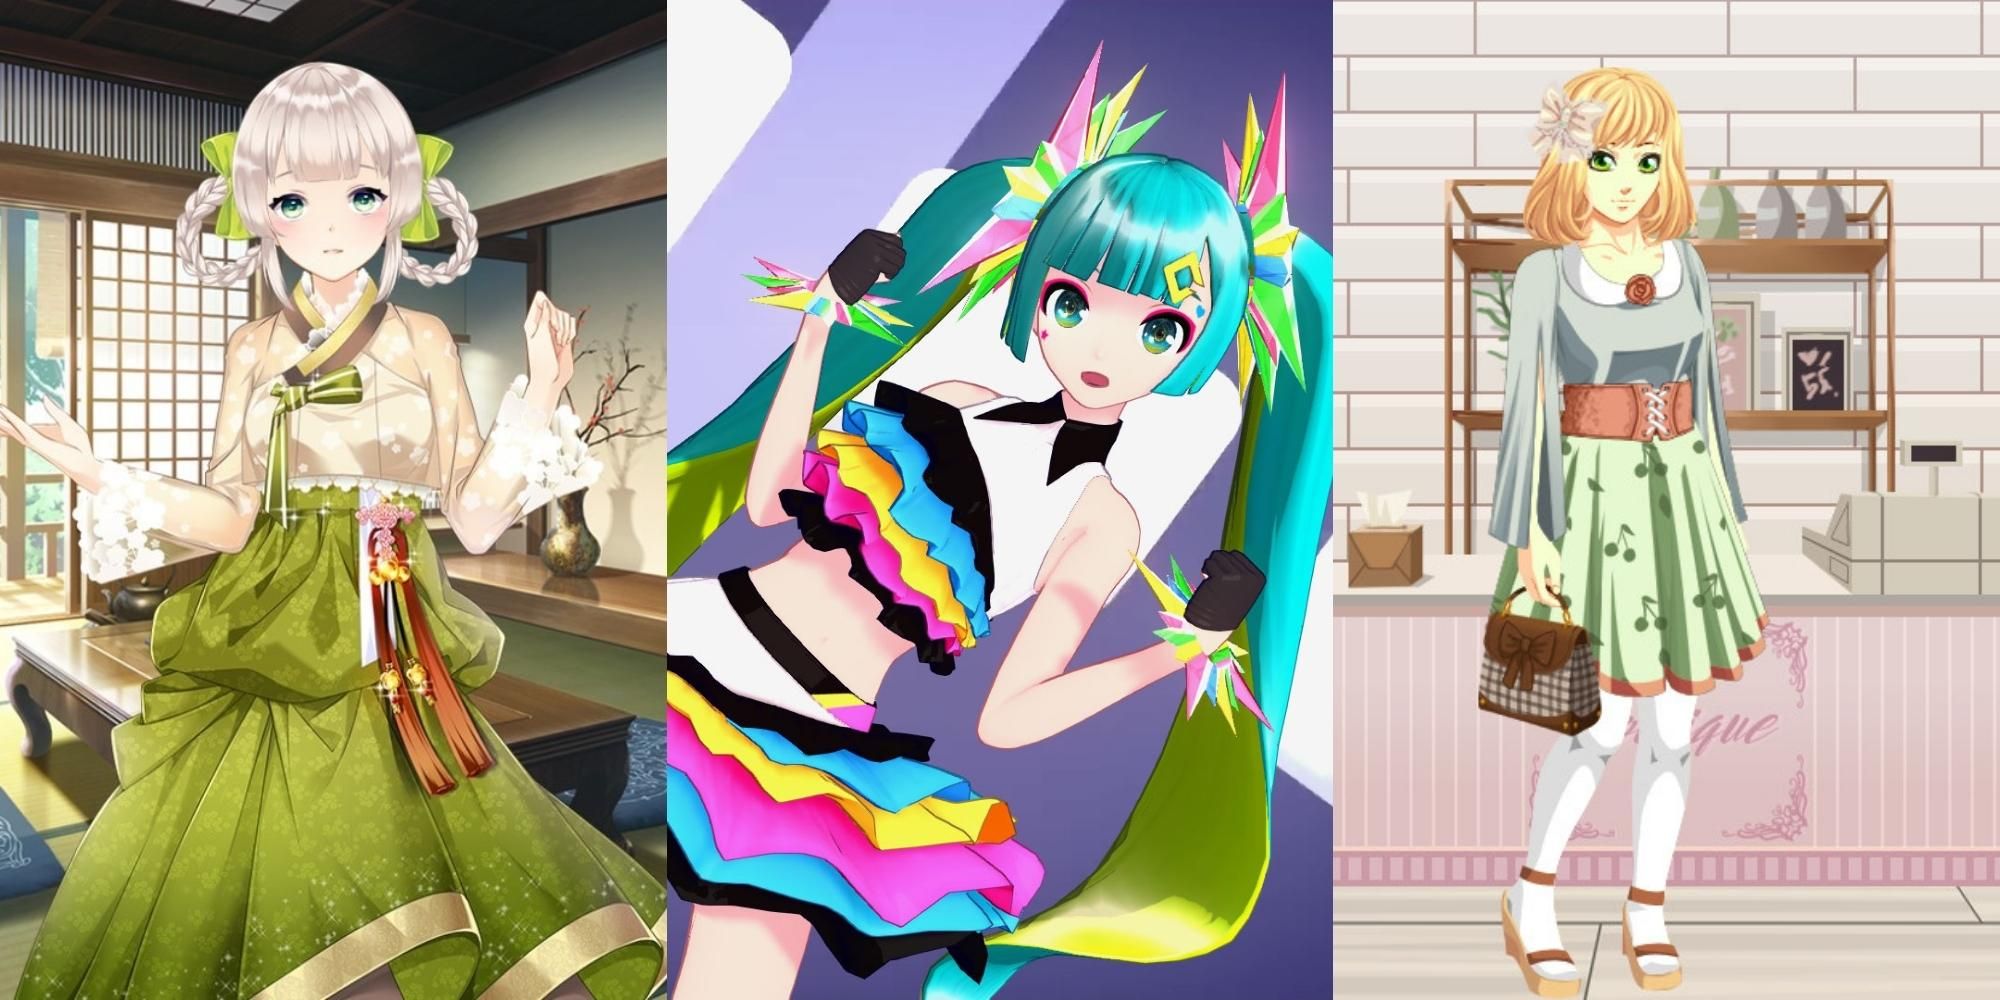 5 Awesome Mobile Games Based on Popular Anime